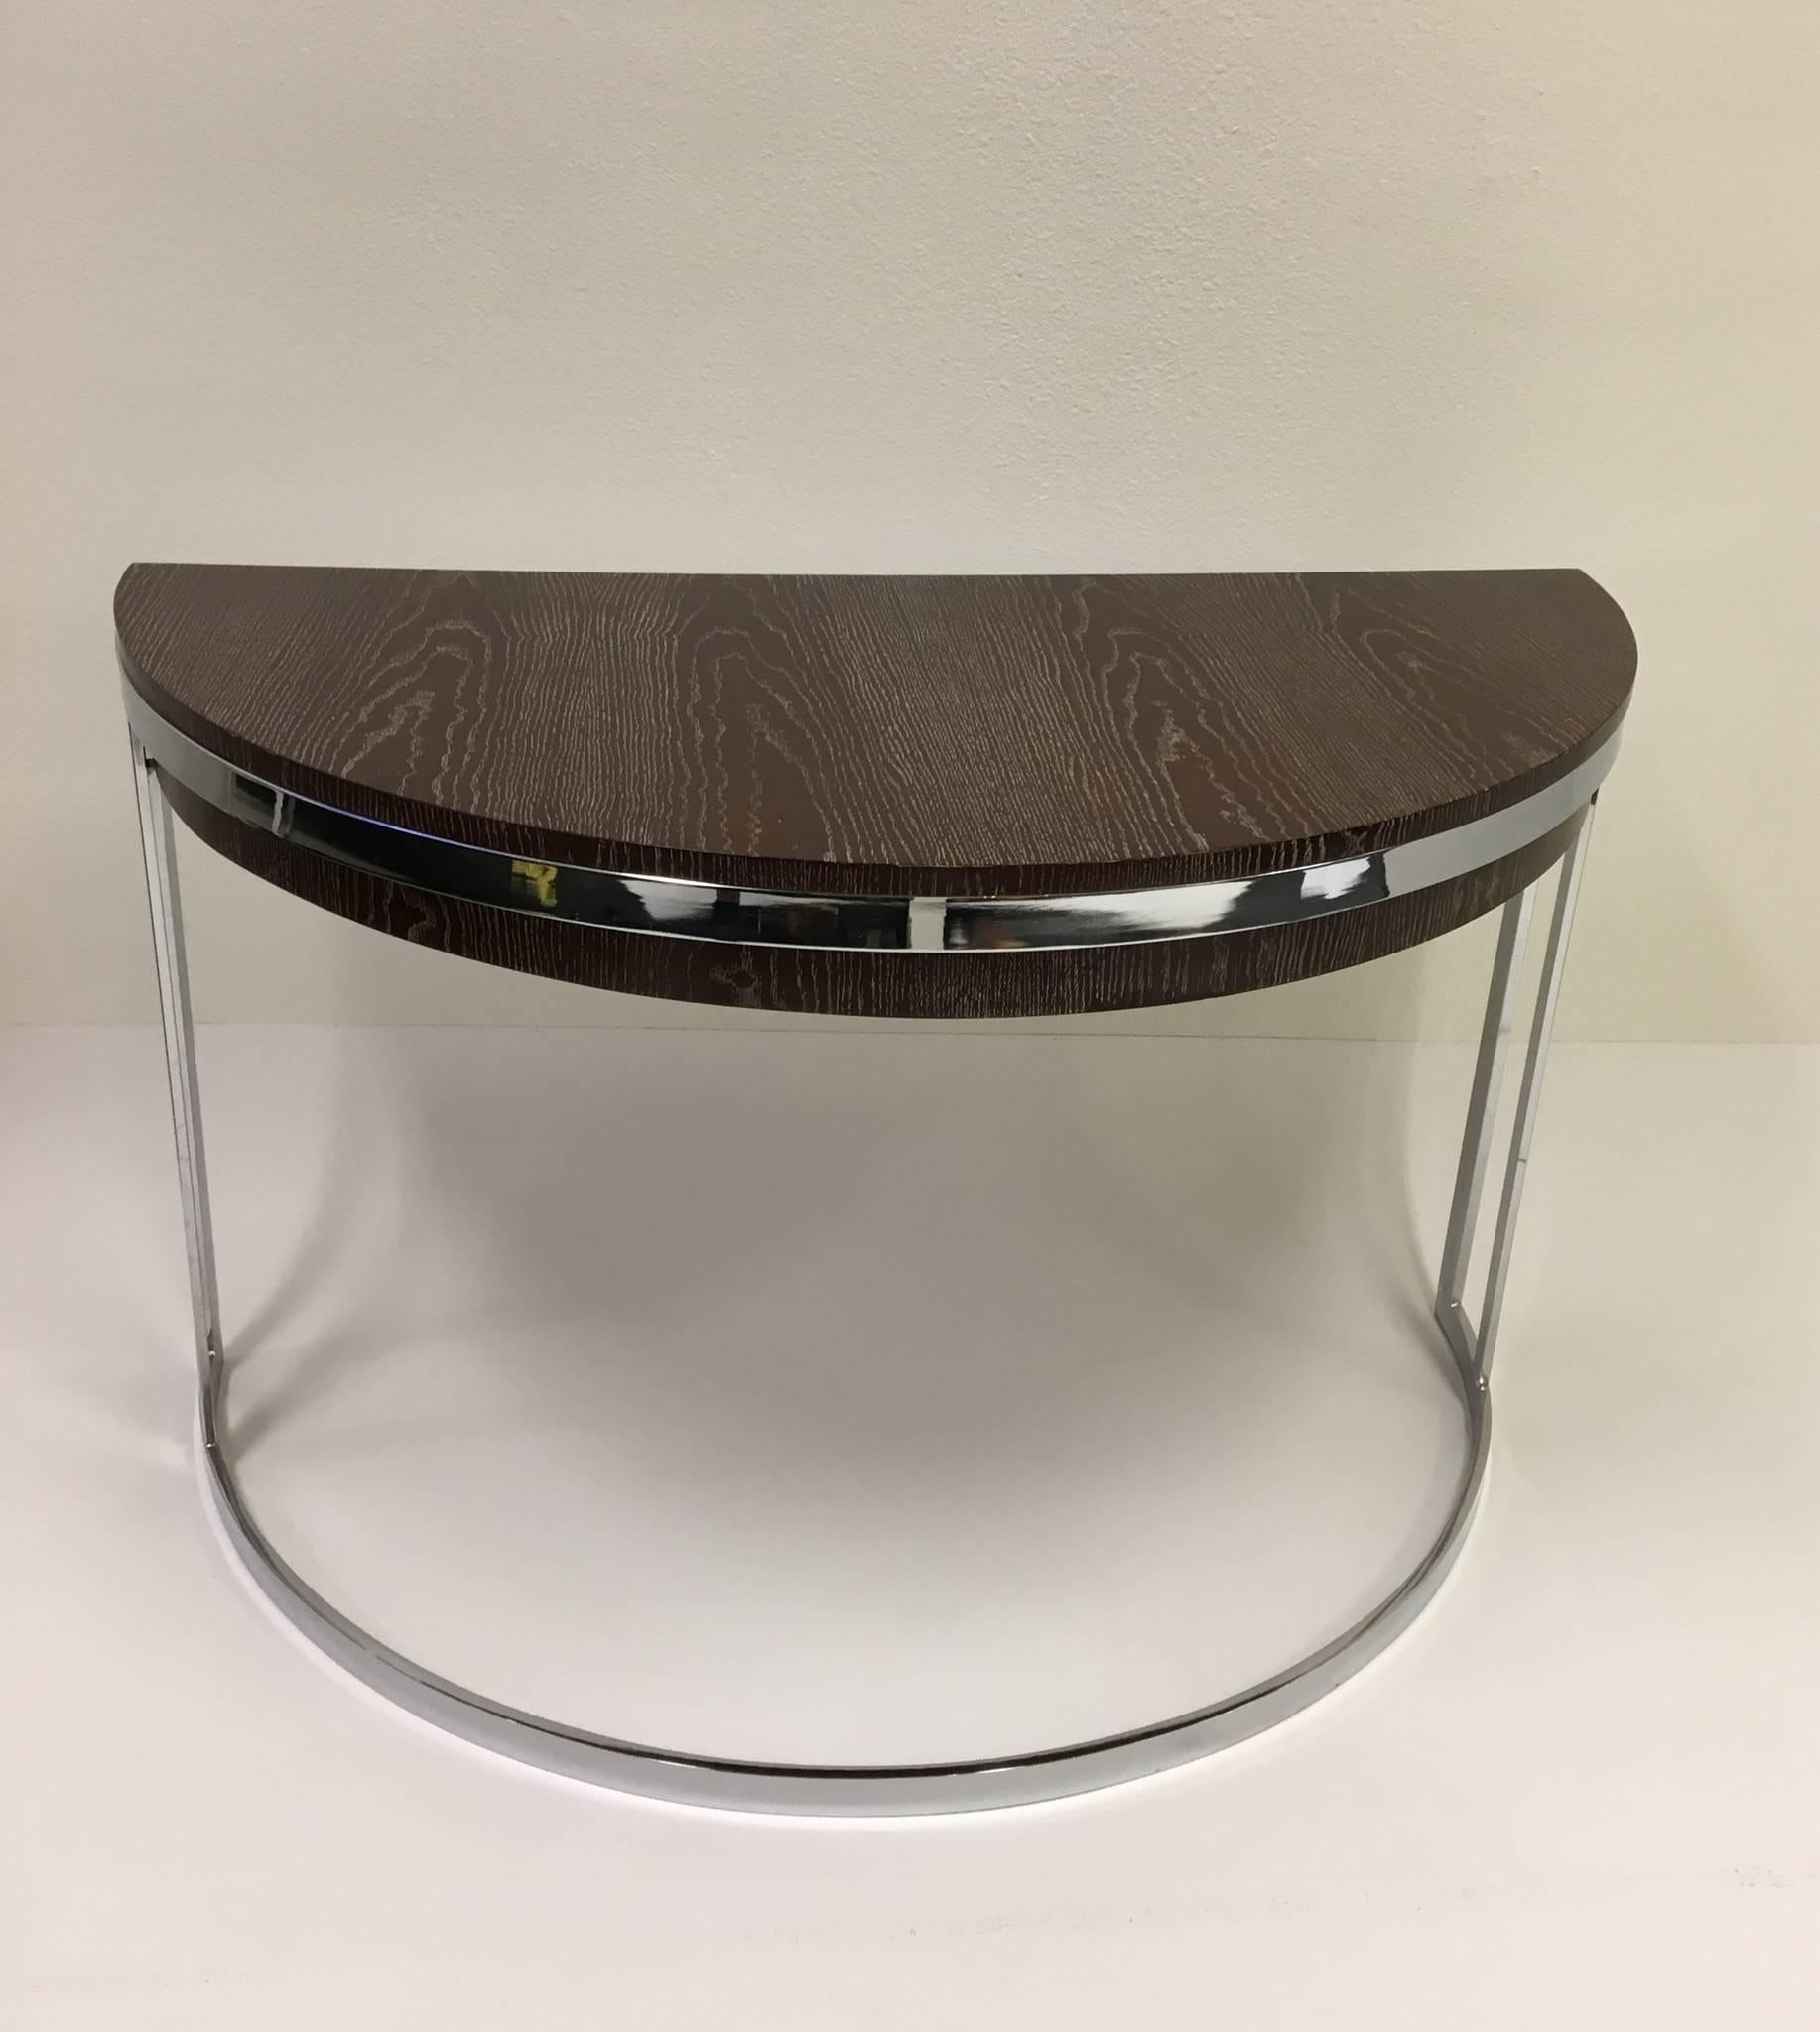 A beautiful cerused and polished chrome desk with a drawer designed by Milo Baughman in the 1970s. The oak desk has been newly refinished in a dark brown with white cerused.
Dimensions: 30.75 inches high 48 inches wide 24 inches deep.